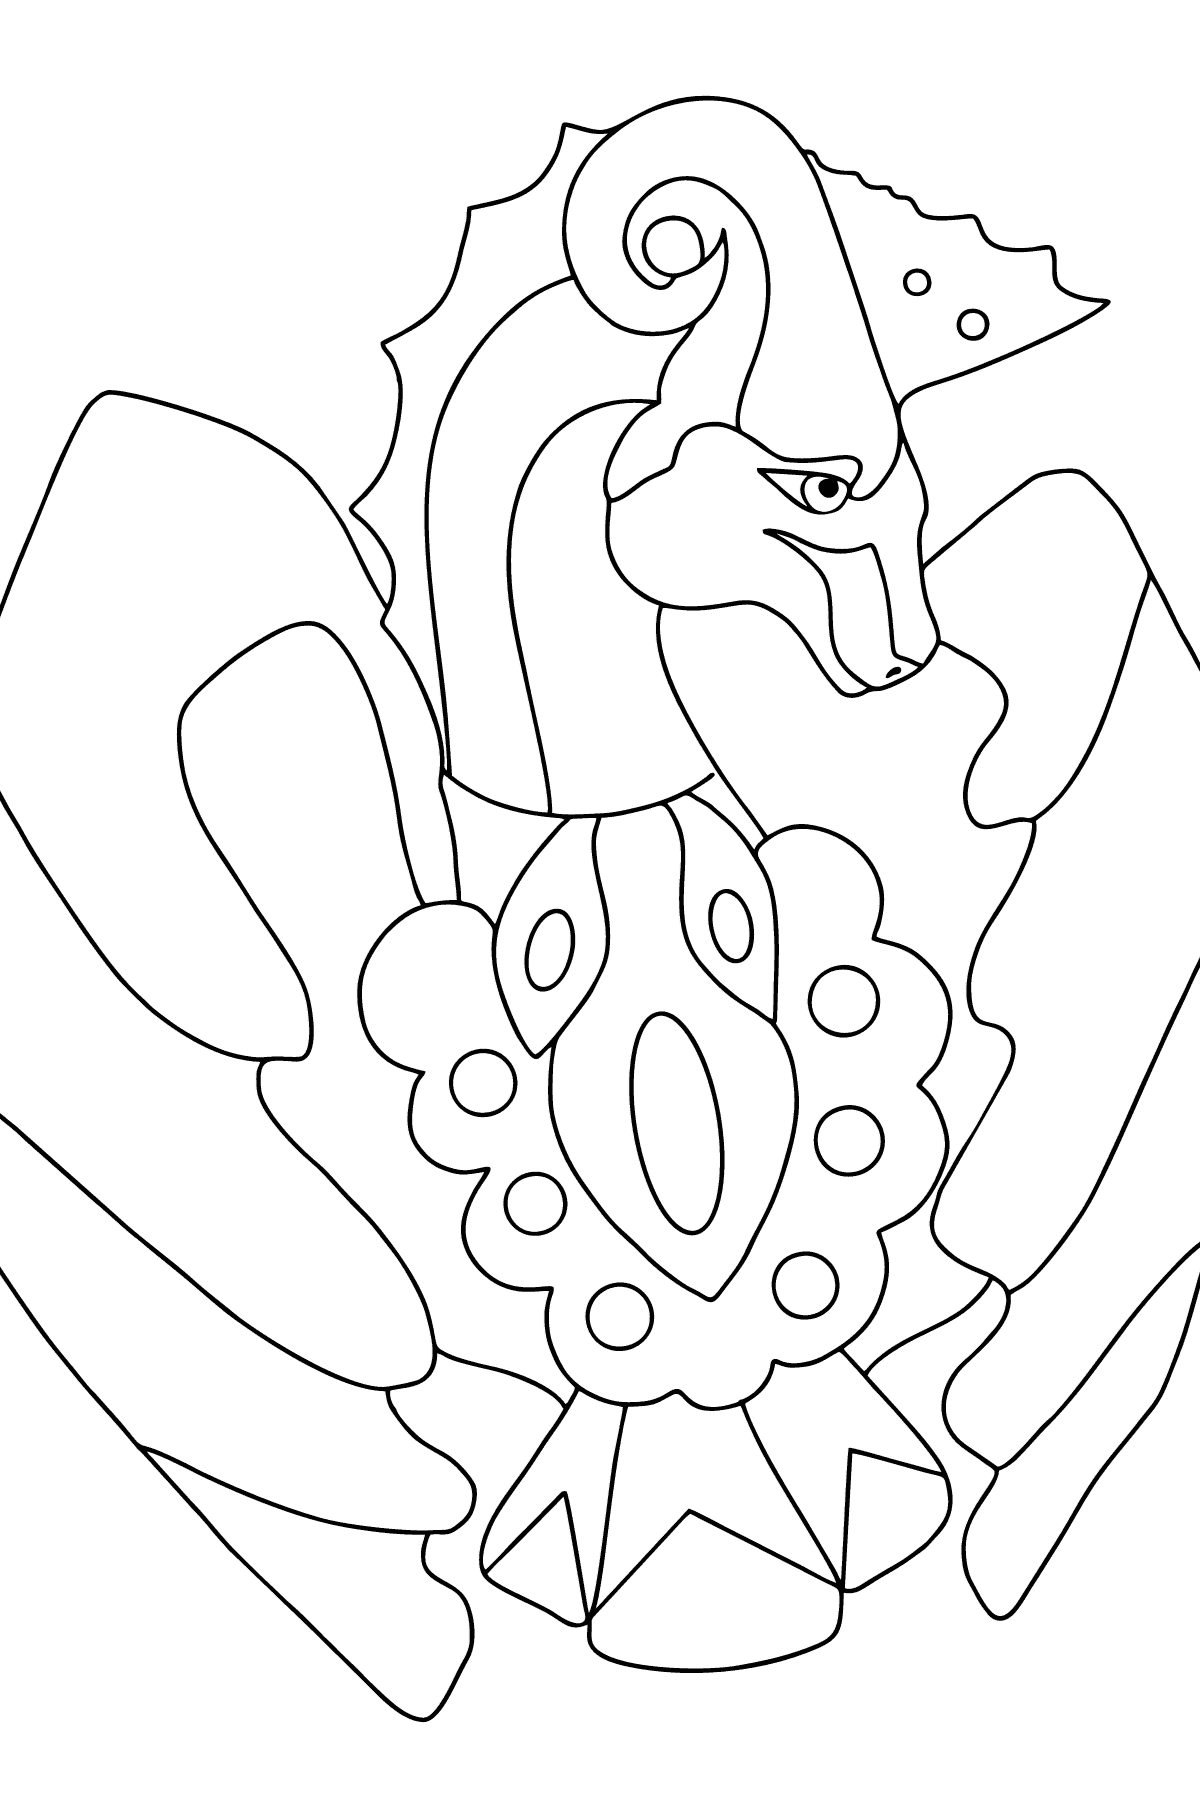 Emerald Dragon coloring page (difficult) - Coloring Pages for Kids